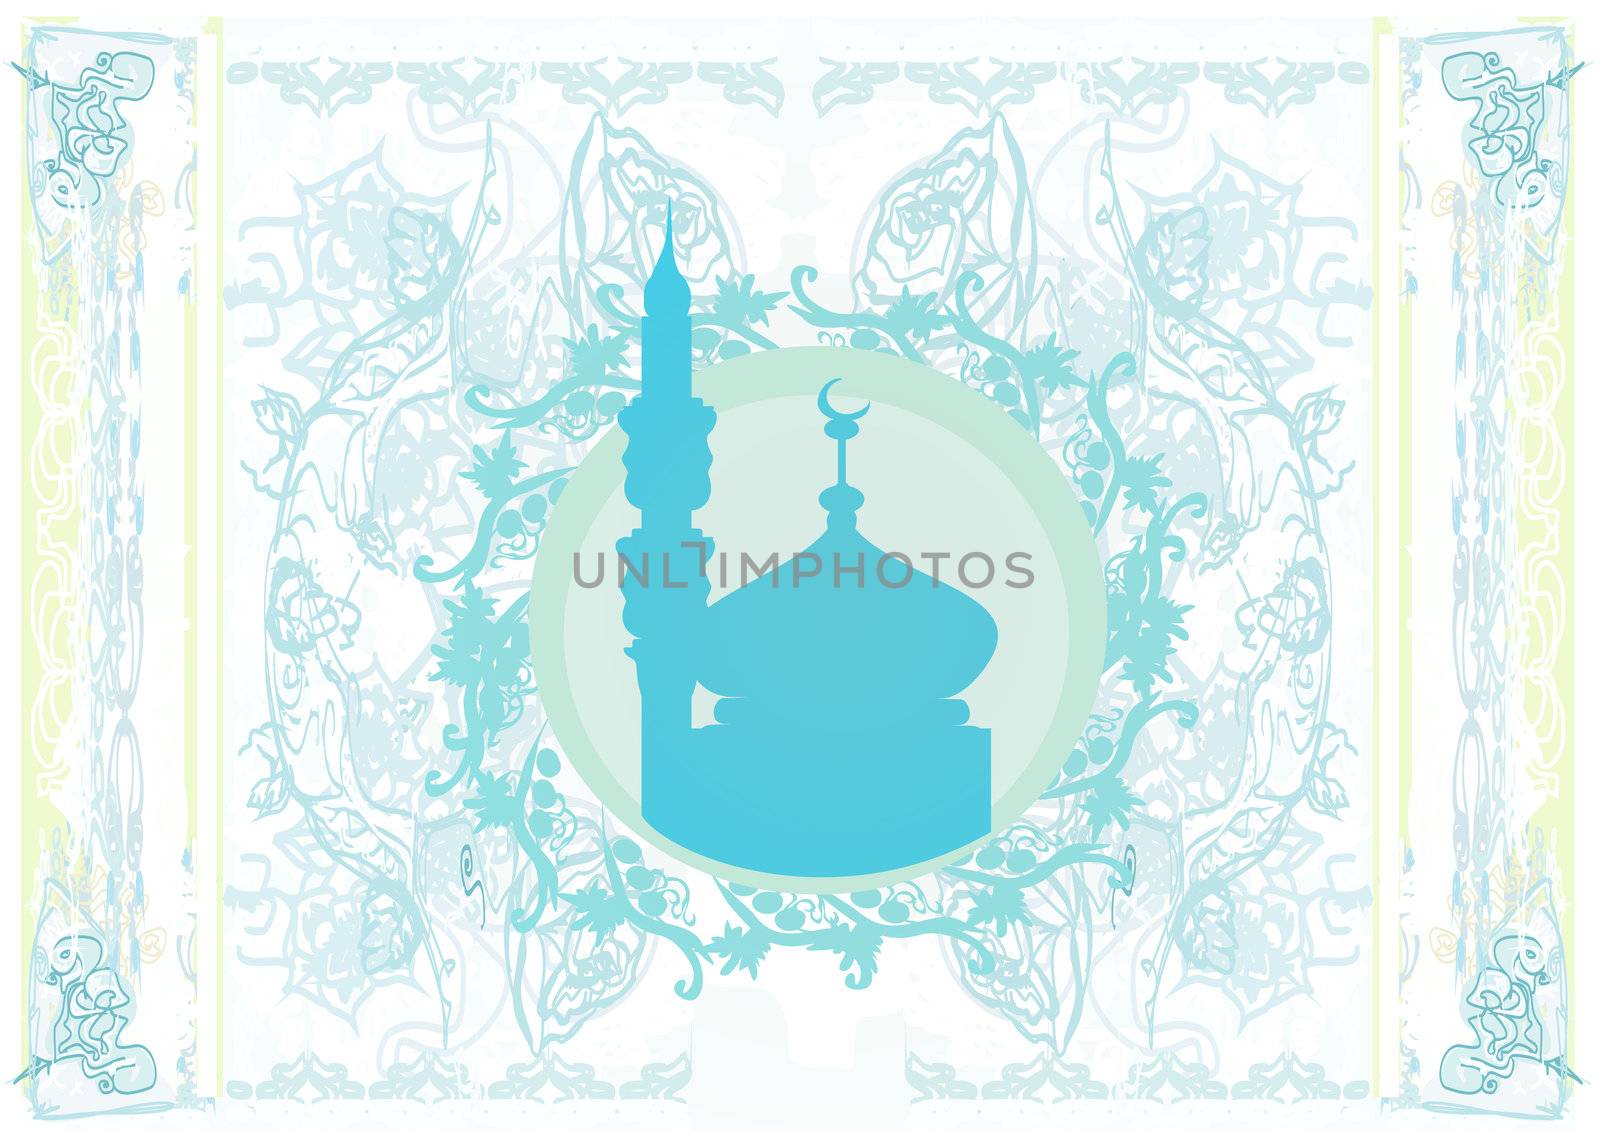 Ramadan background - mosque silhouette vector card by JackyBrown